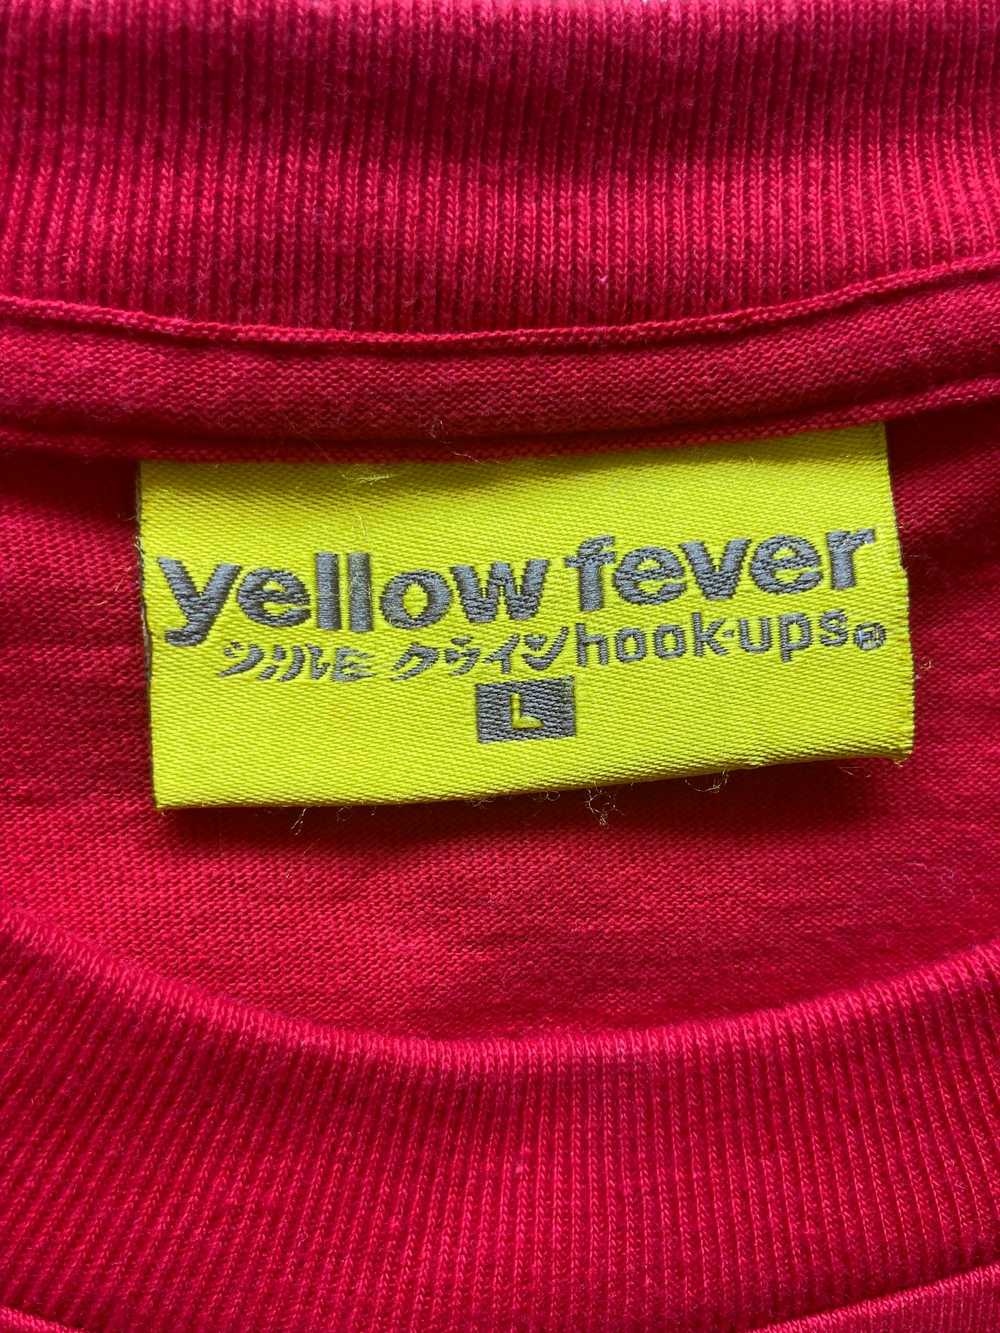 Vintage hookups yellow fever blow up doll tee - image 5